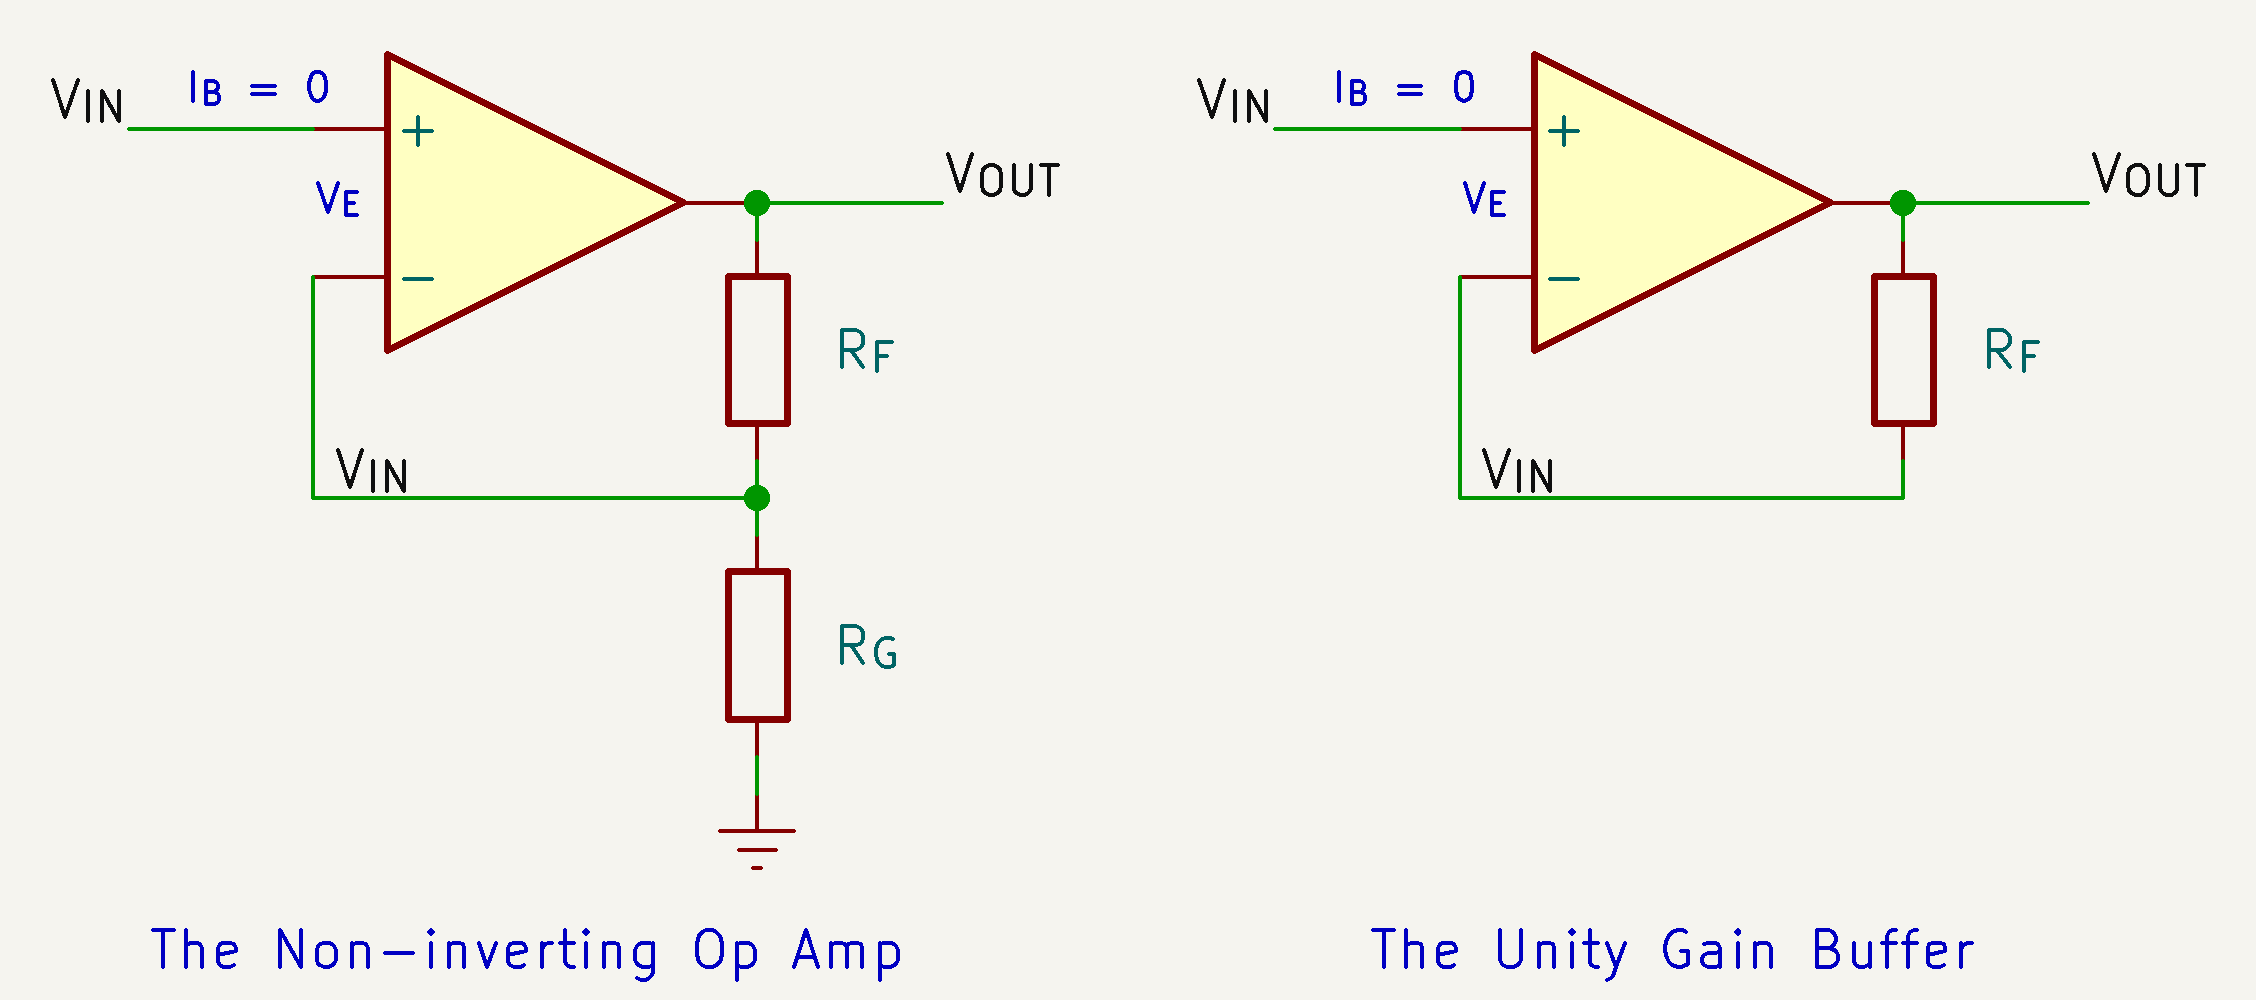 The Non-inverting Op Amp & The Unity Gain Buffer